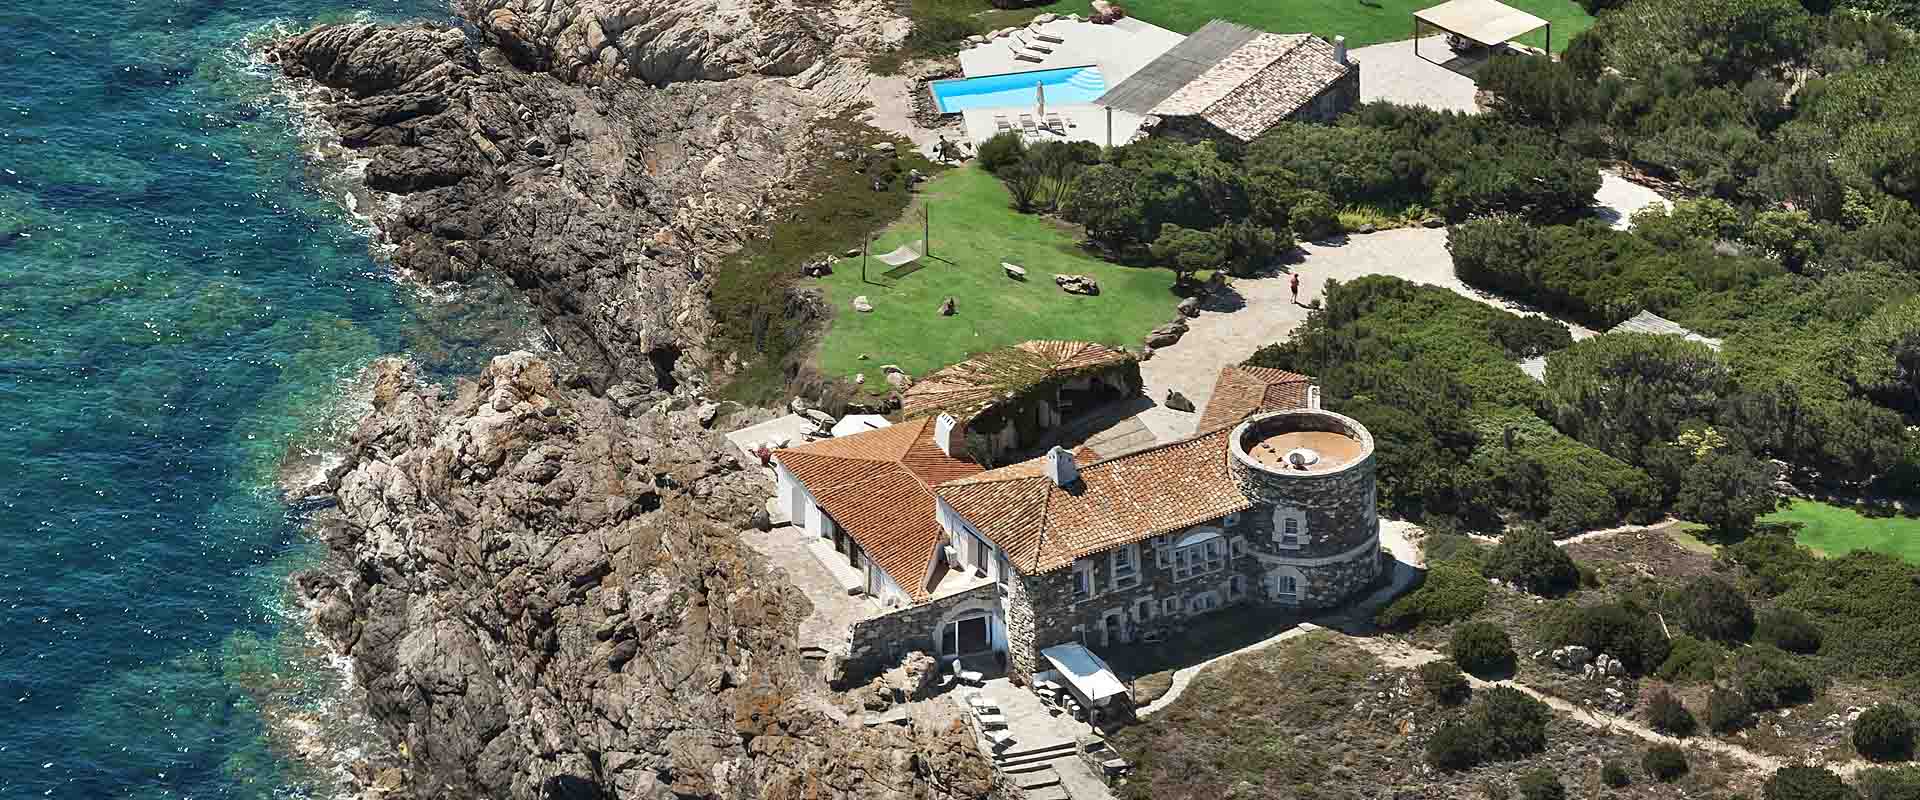 Villa Volpe overview from helicopter